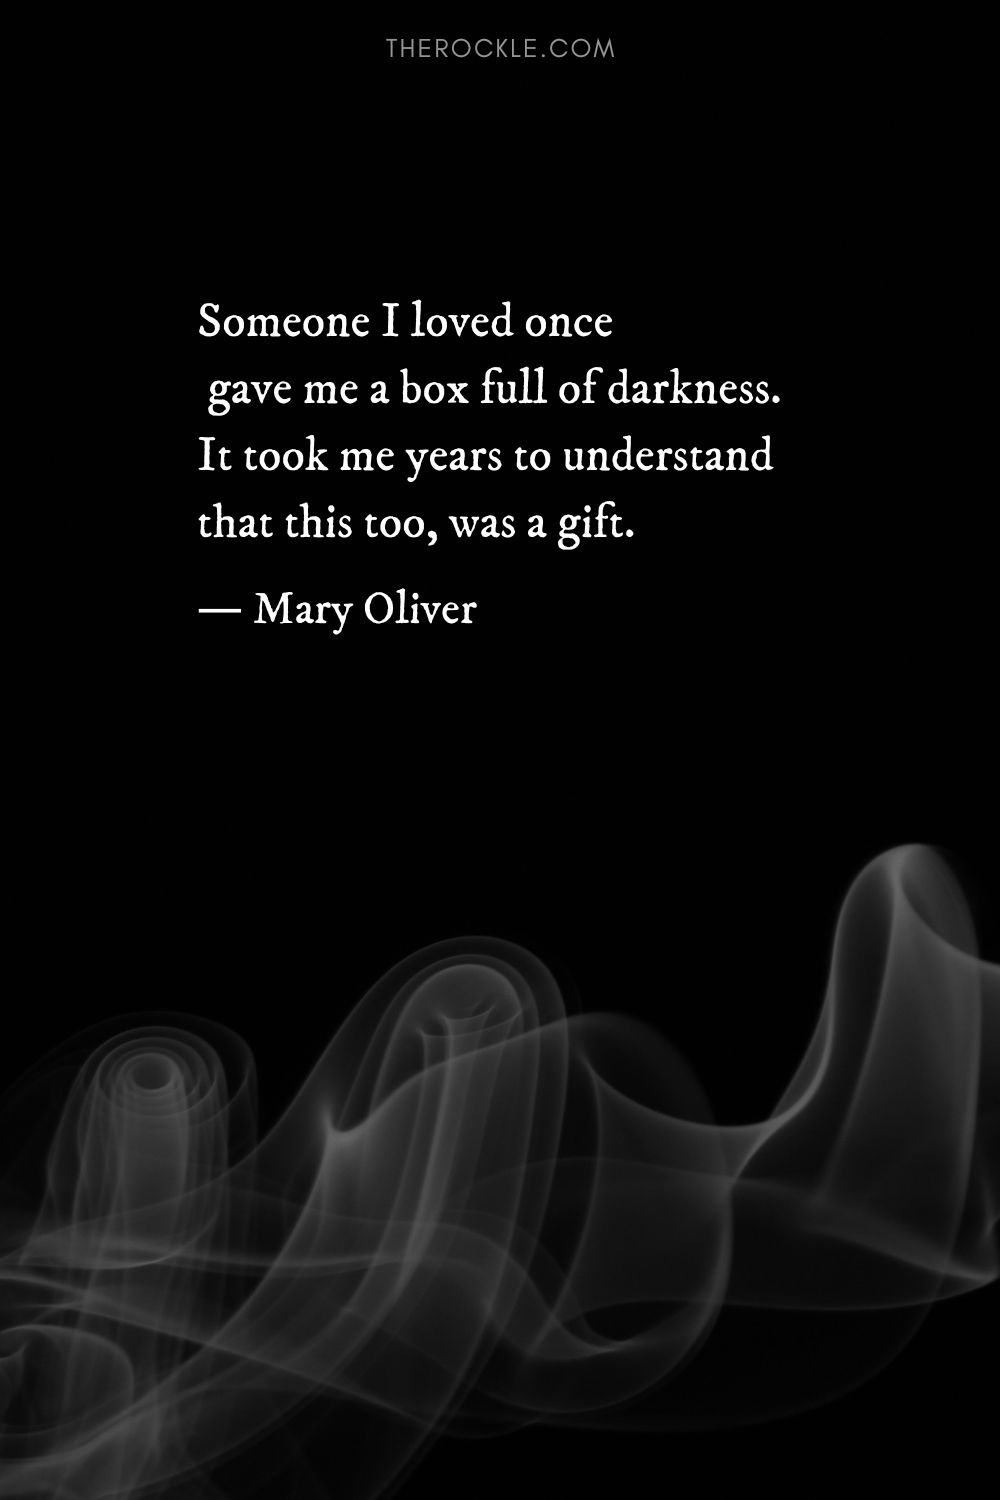 Mary Oliver quote: “Someone I loved once gave me a box full of darkness. It took me years to understand that this too, was a gift.”